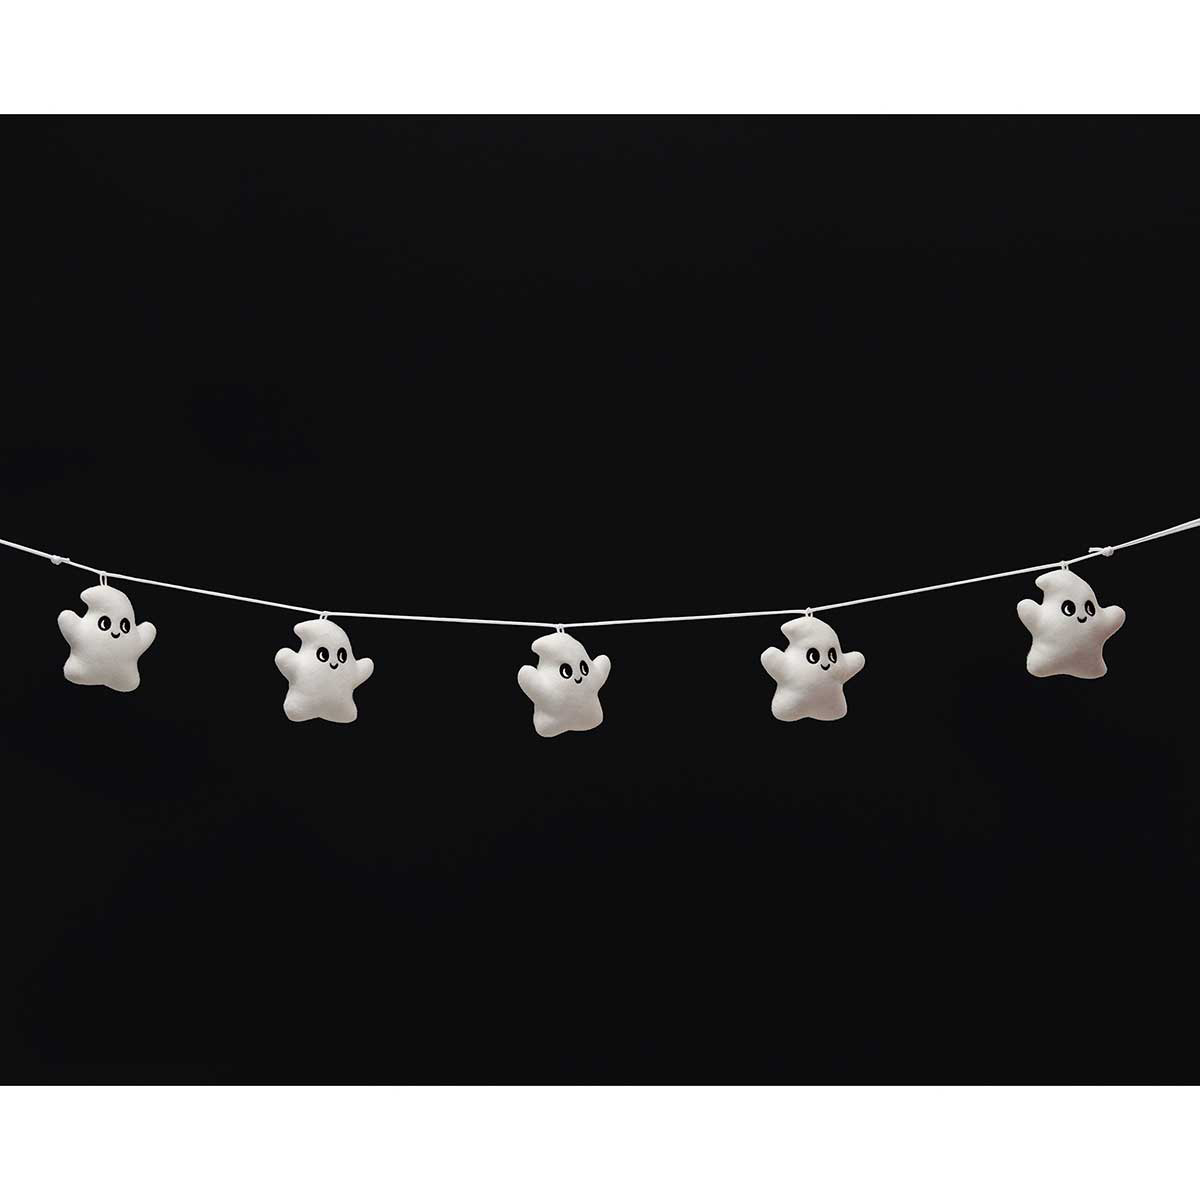 ECHO GHOST GARLAND WITH 5 (3.5") GHOSTS 3.5"X41" - Click Image to Close